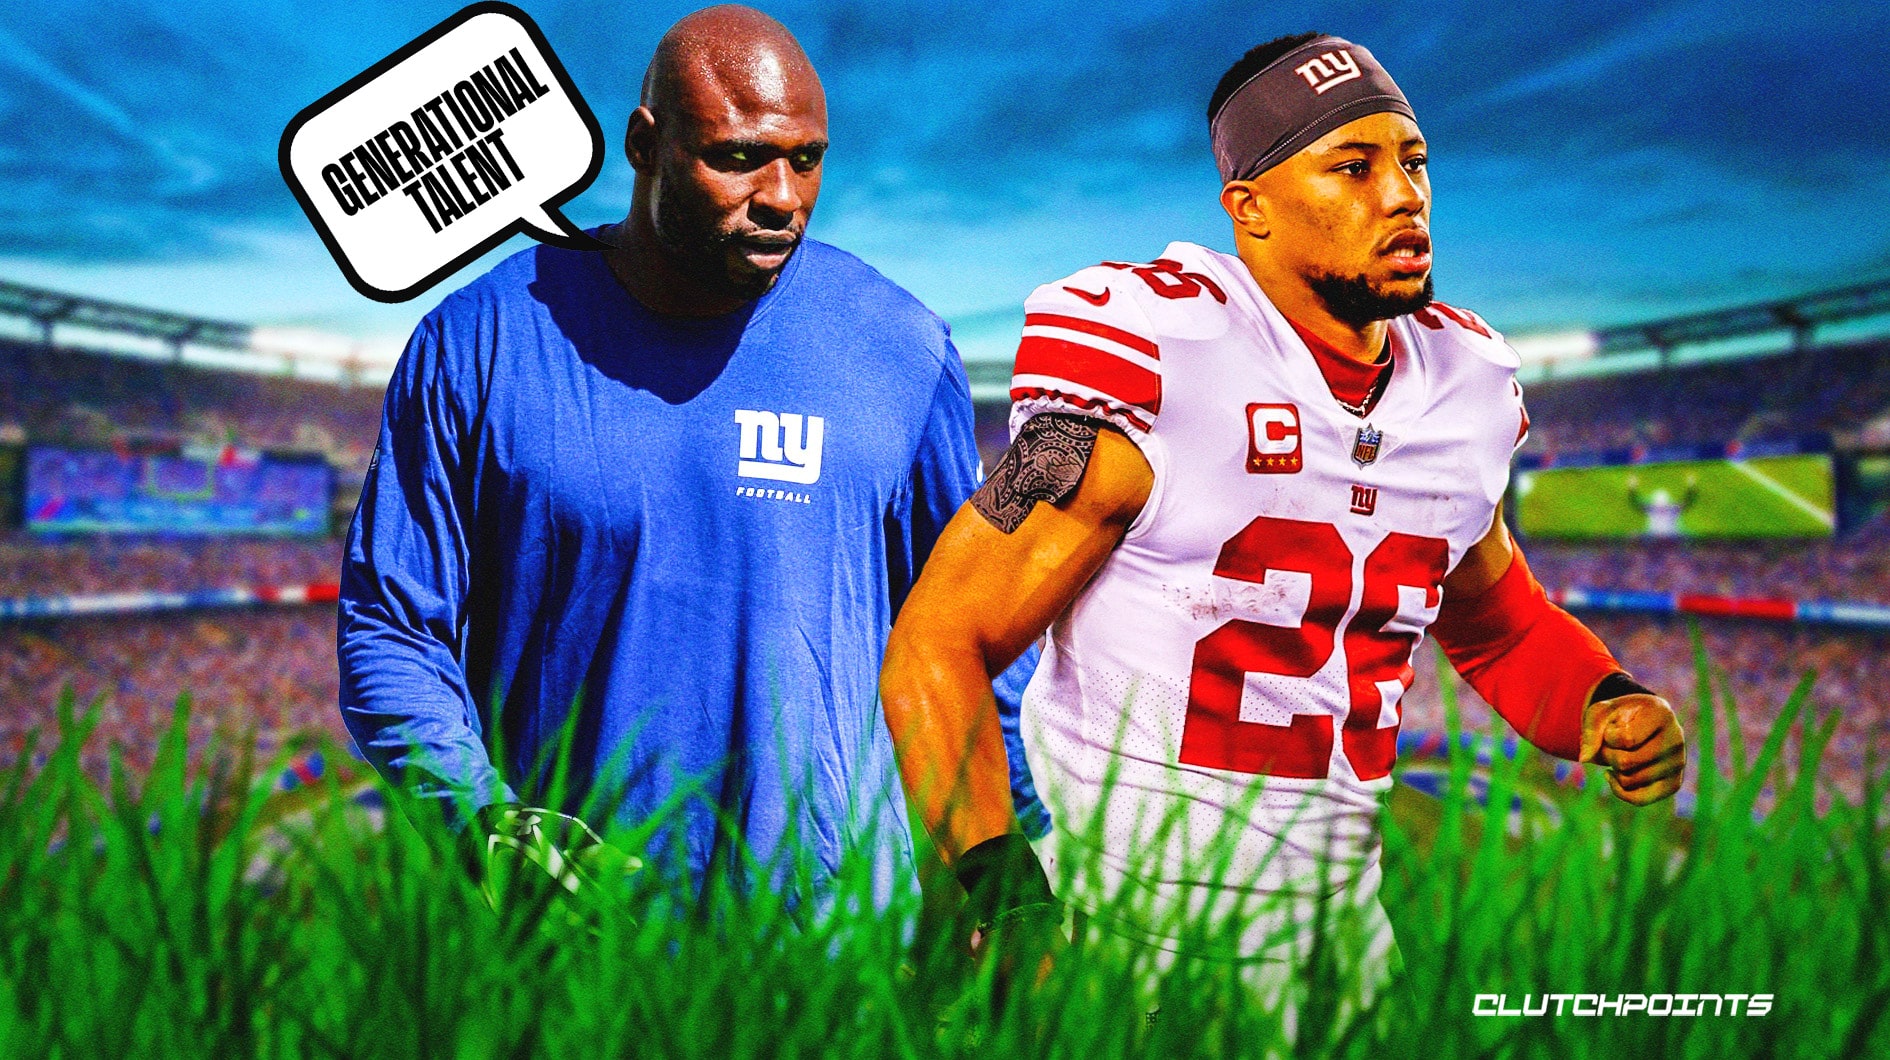 Giants' Saquon Barkley gets vote of support from Brandon Jacobs